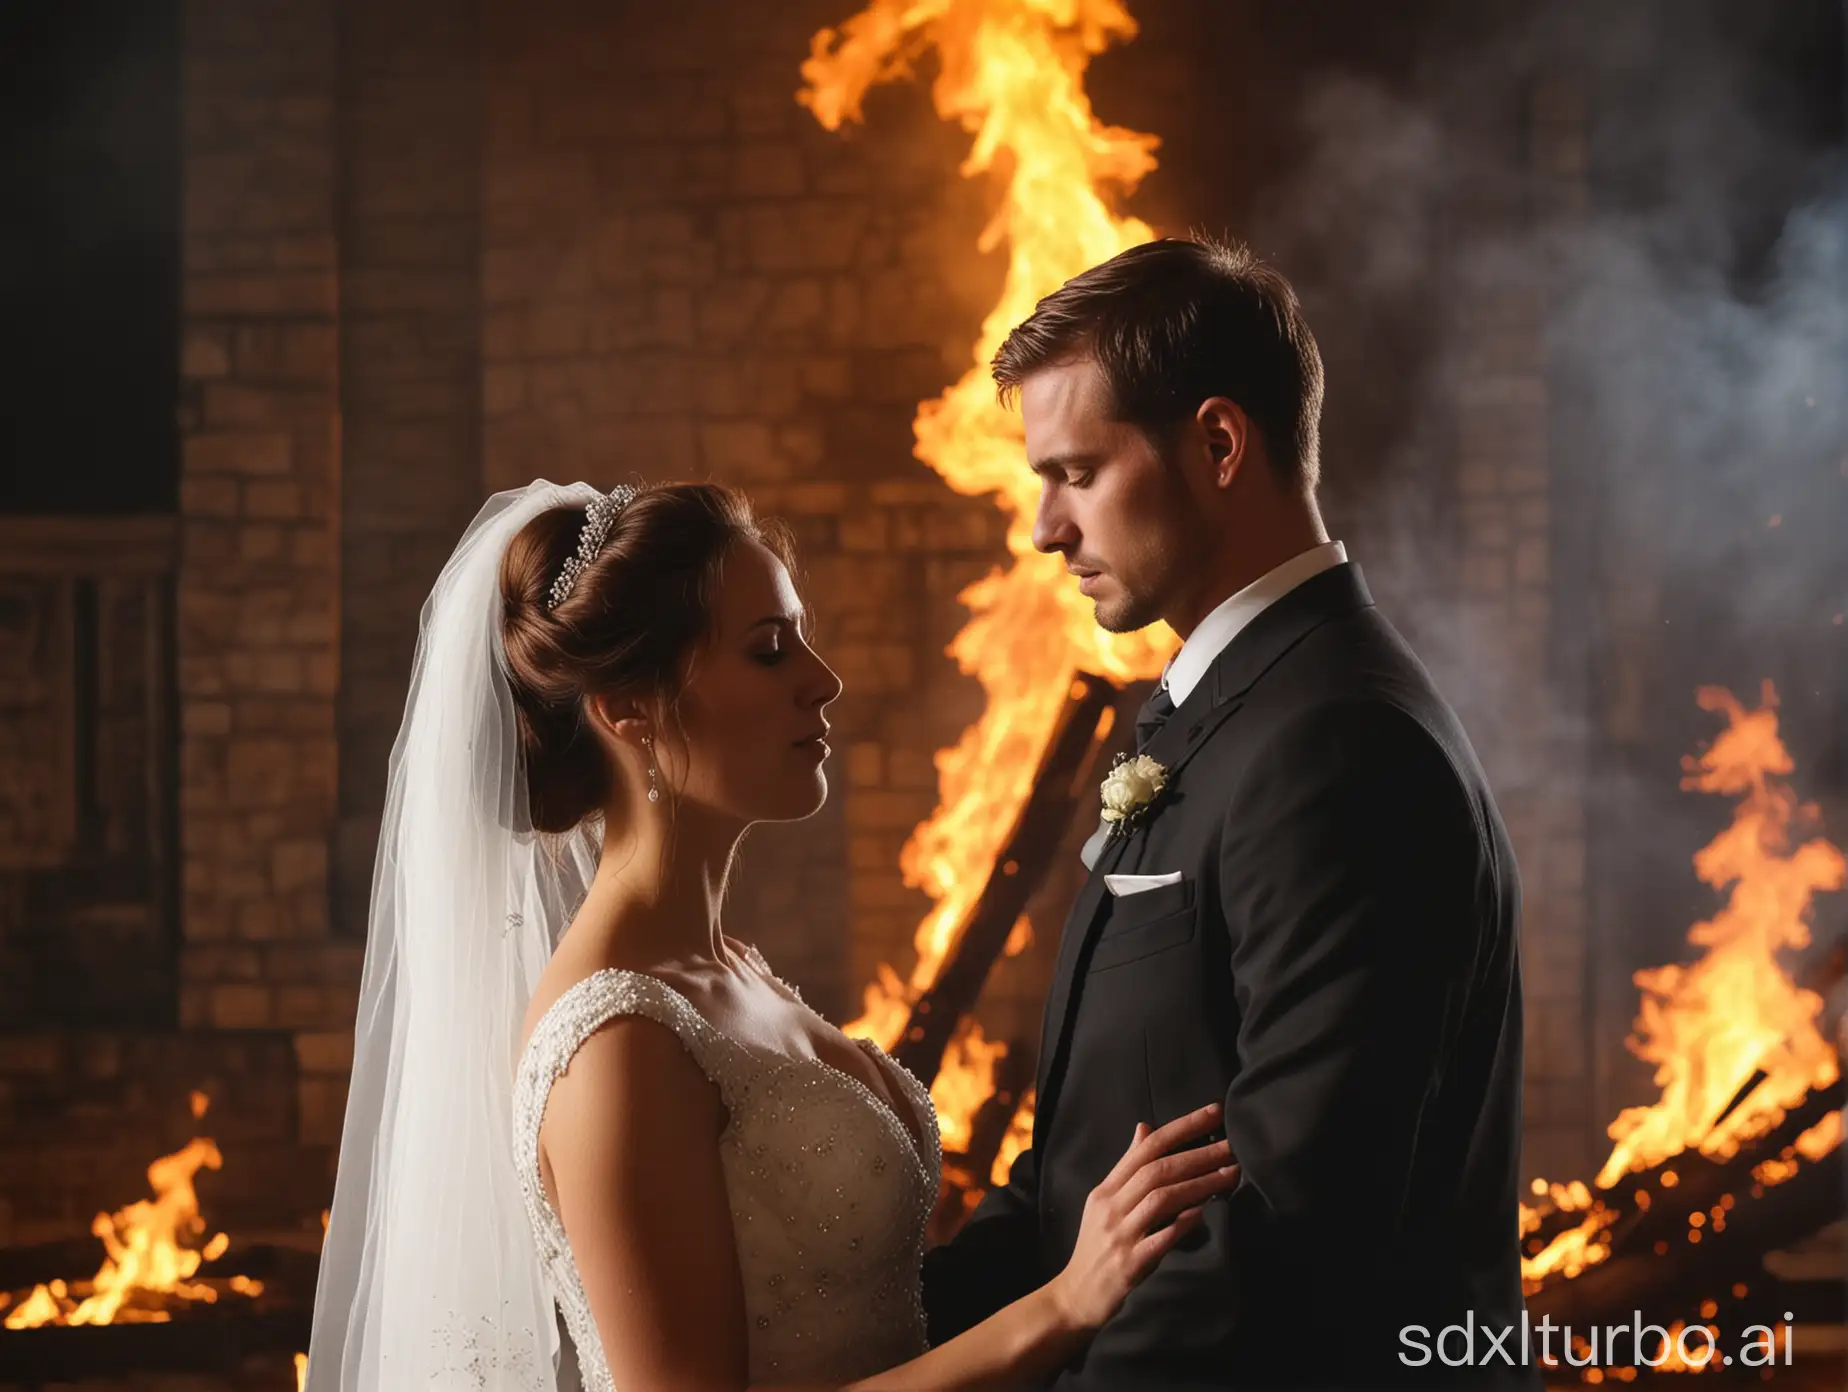 A midshot of a christian sad wedding couple, fire in background